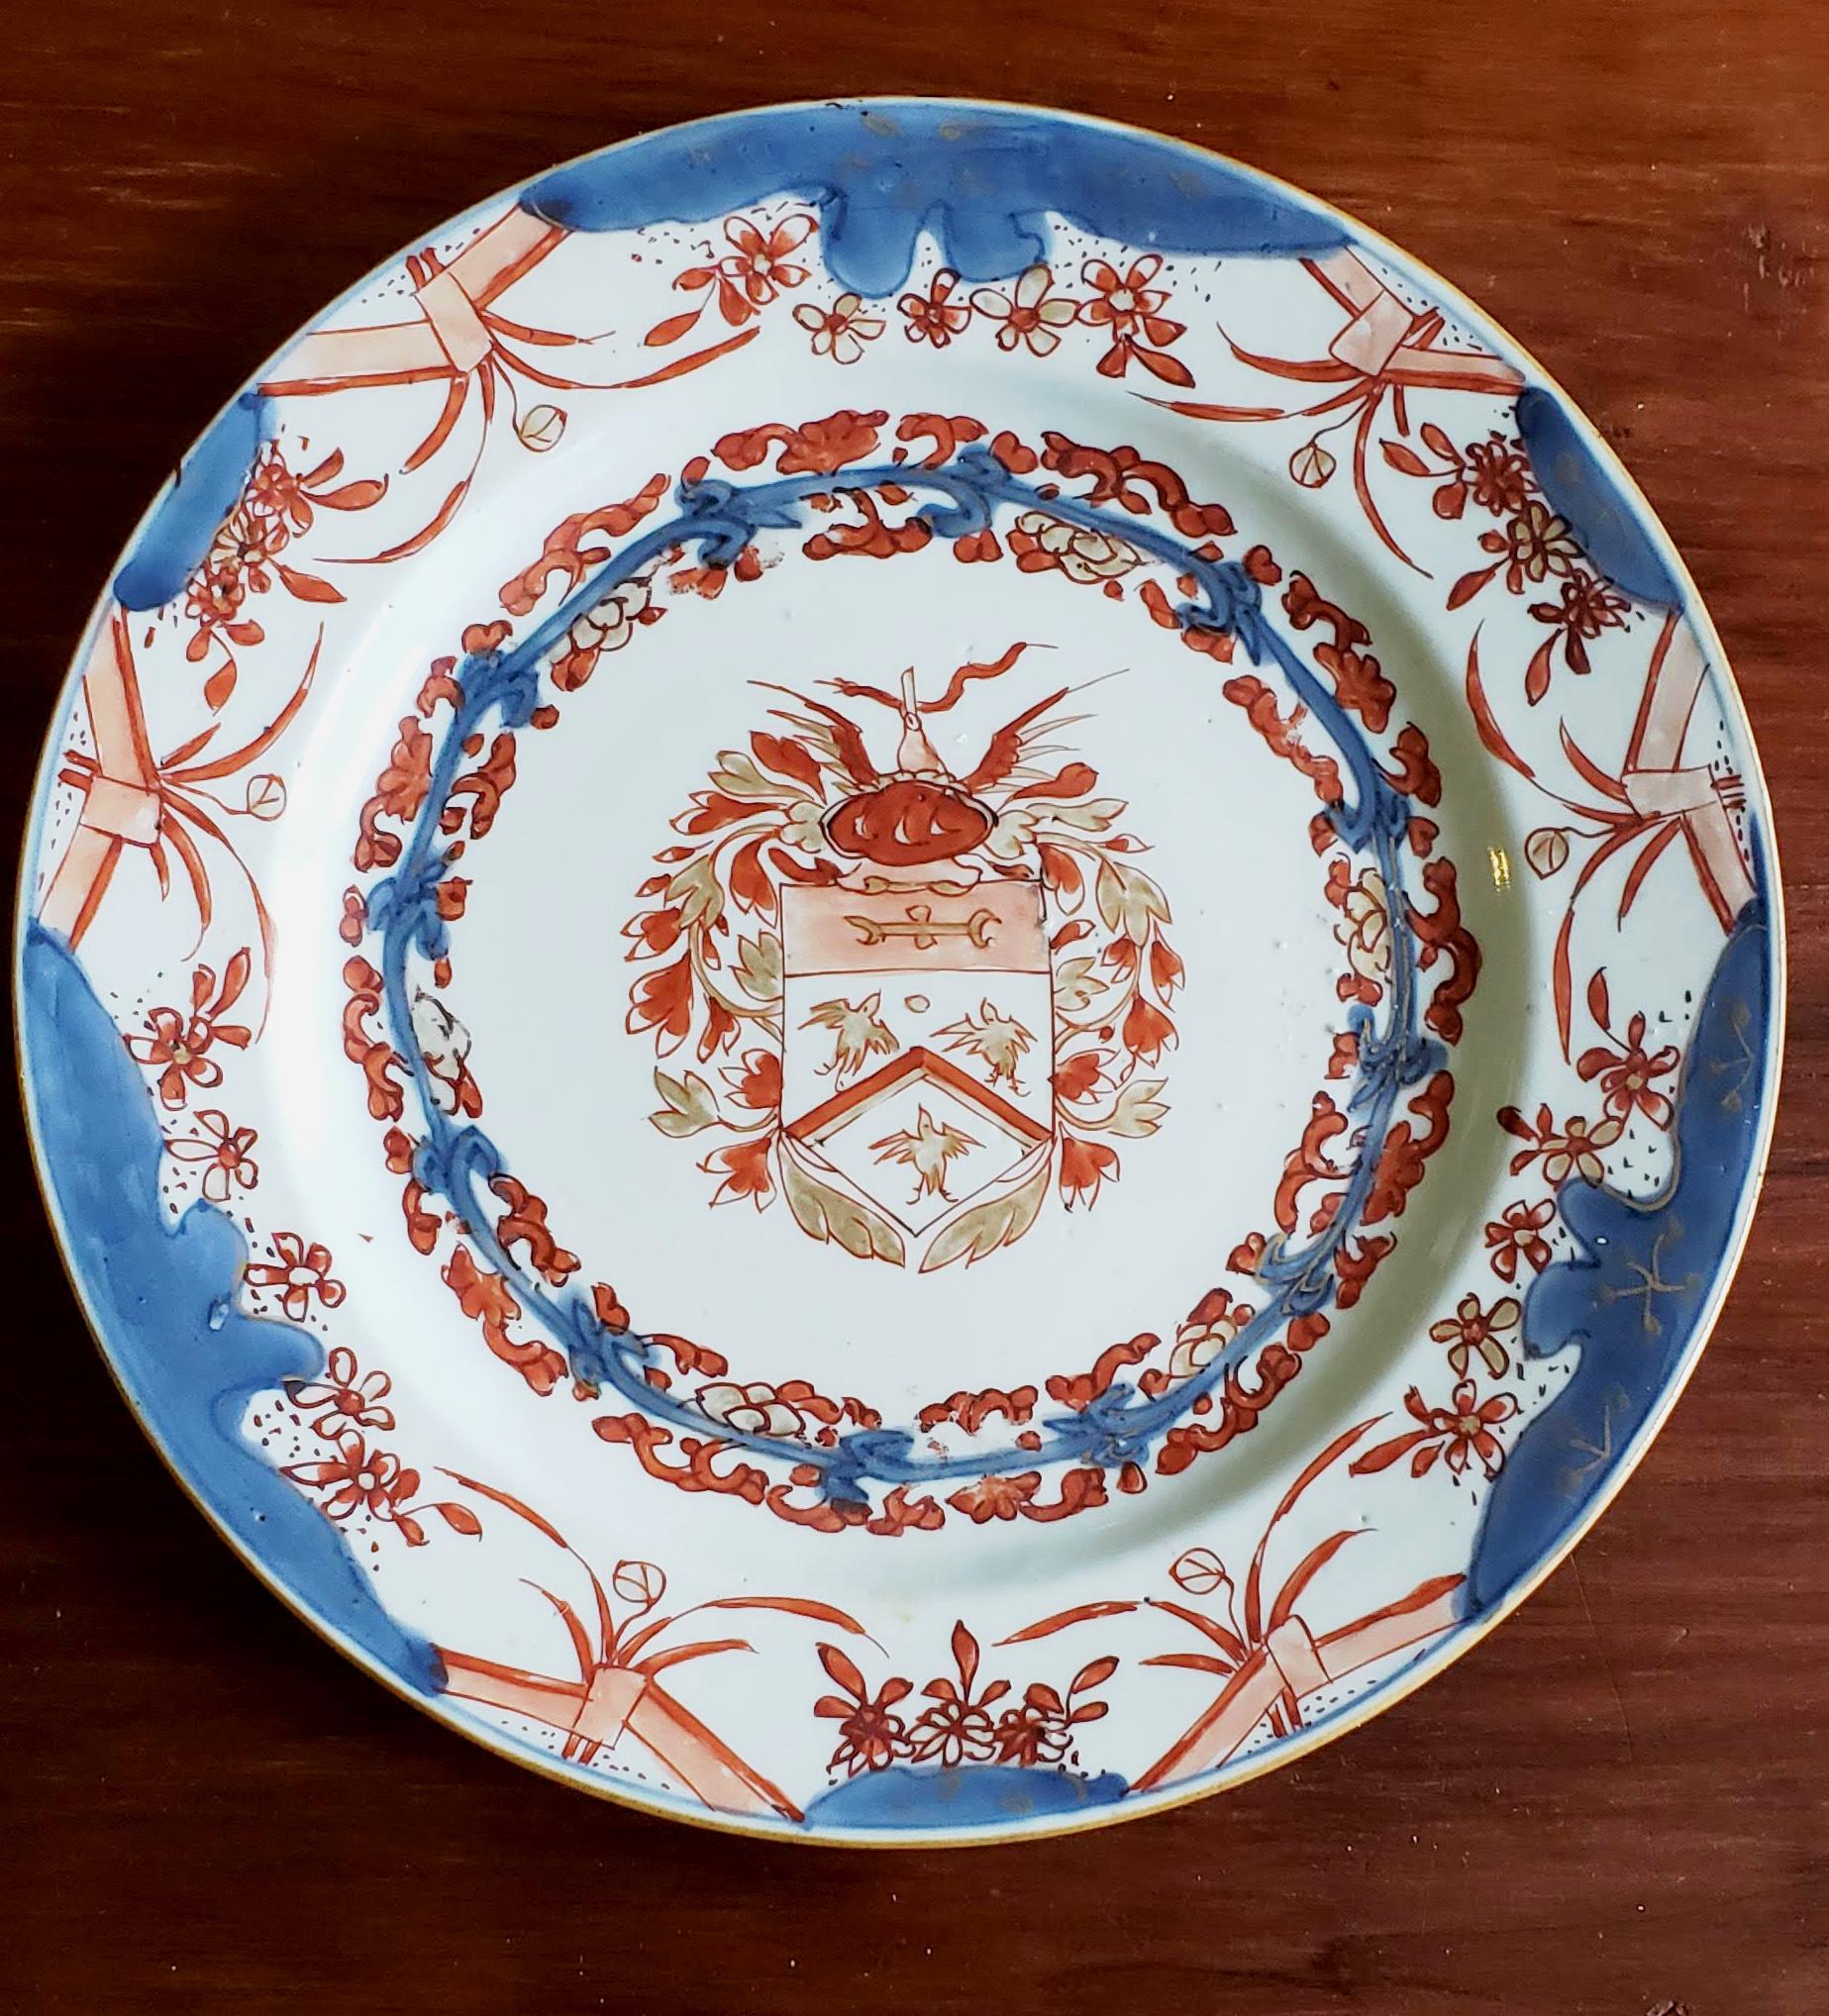 Chinese export porcelain early armorial plates, 
Arms of Van Gellicum, Dutch Market,
Kangxi period, 1710-1730.

The Imari armorial plates were made for the Dutch family, Van Gellicum. An armorial in the centre and on the sides a floral scroll